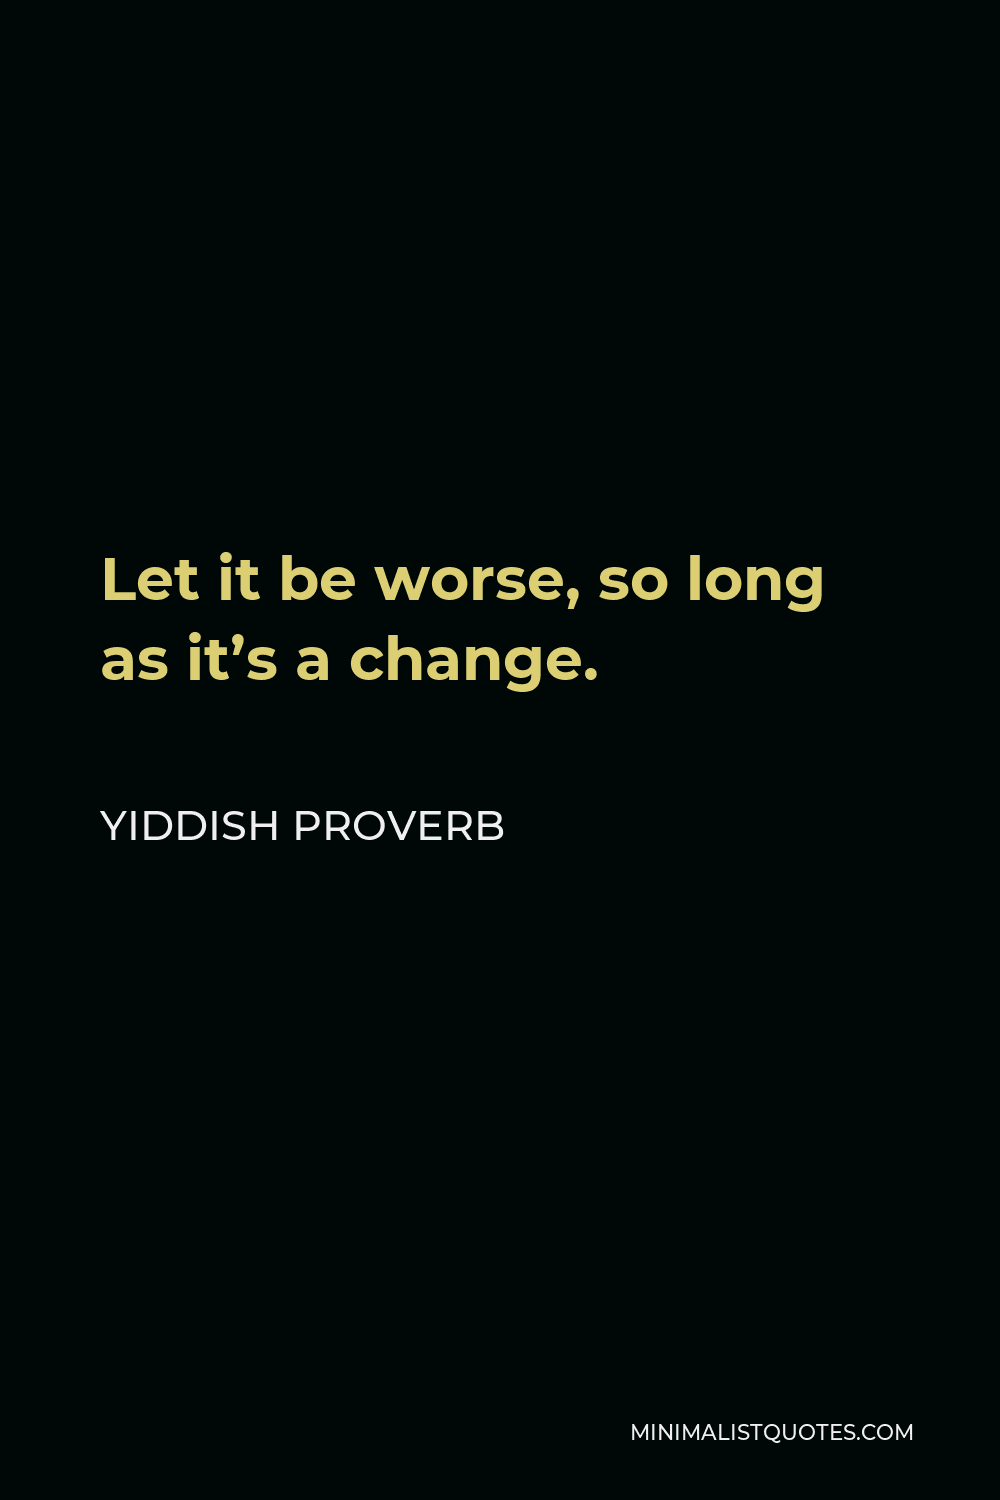 Yiddish Proverb Quote - Let it be worse, so long as it’s a change.